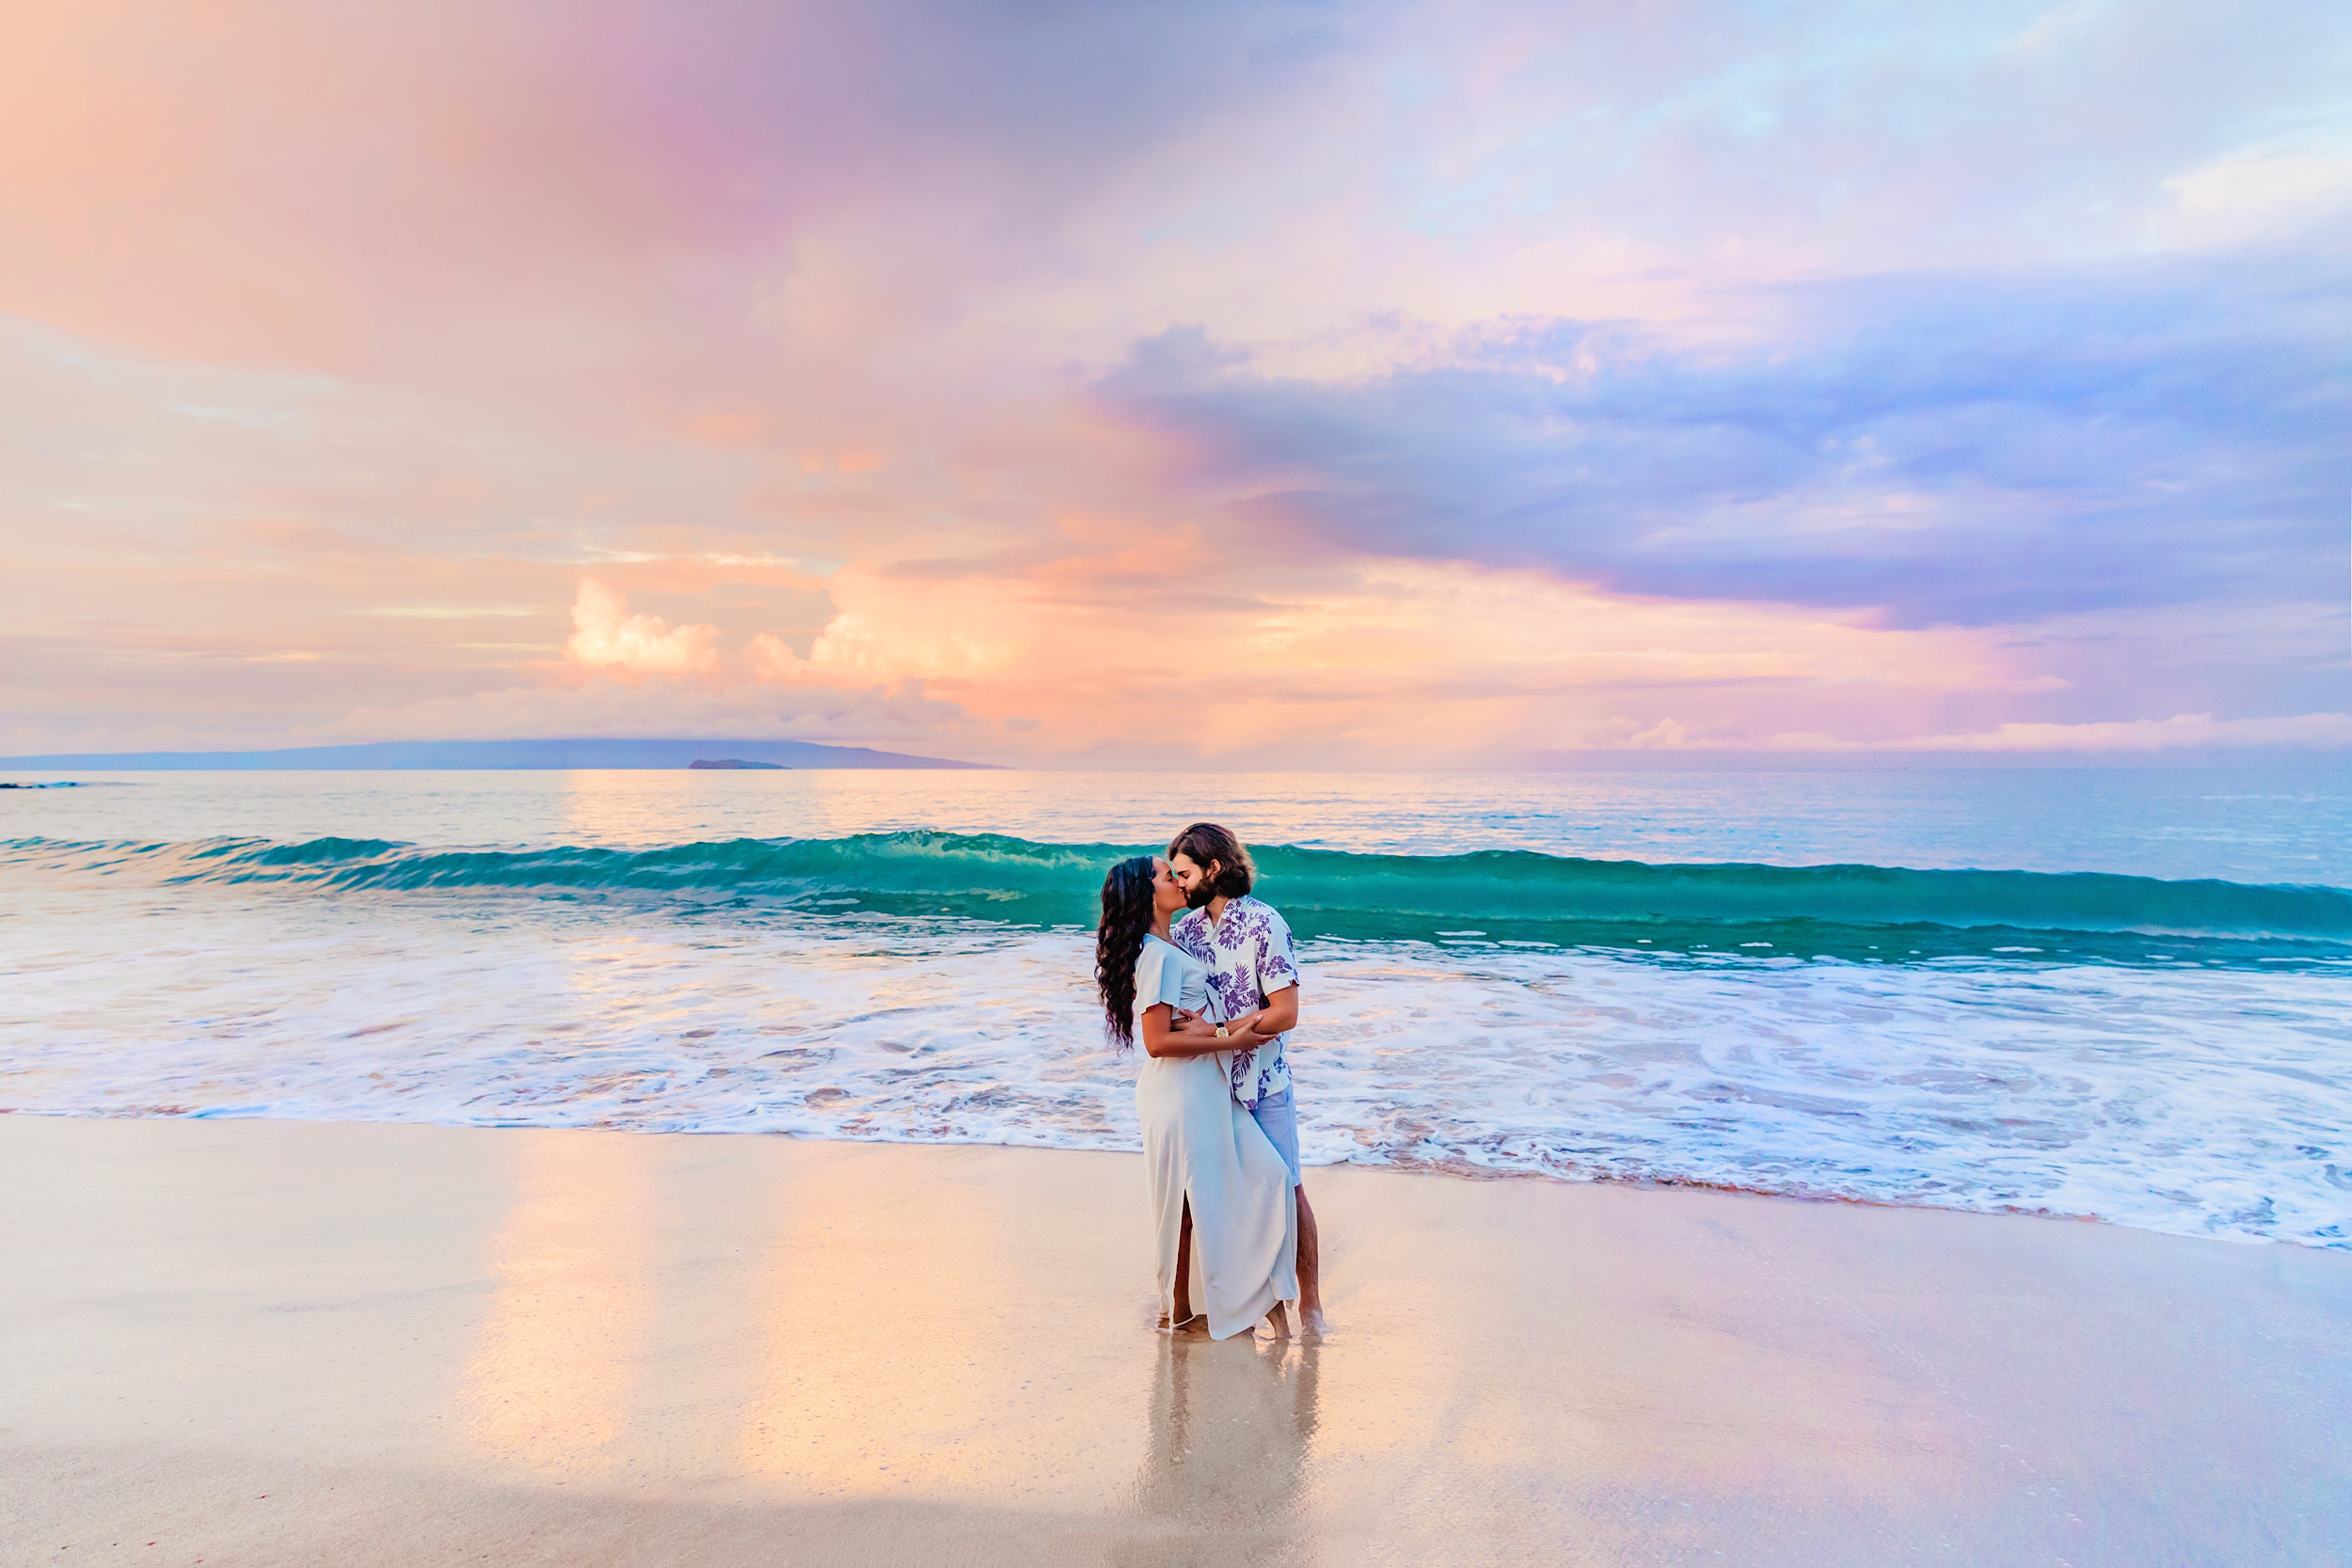 Newly engaged couple kisses on the beach at sunrise after being photographed by Love and Water Photography on Maui.